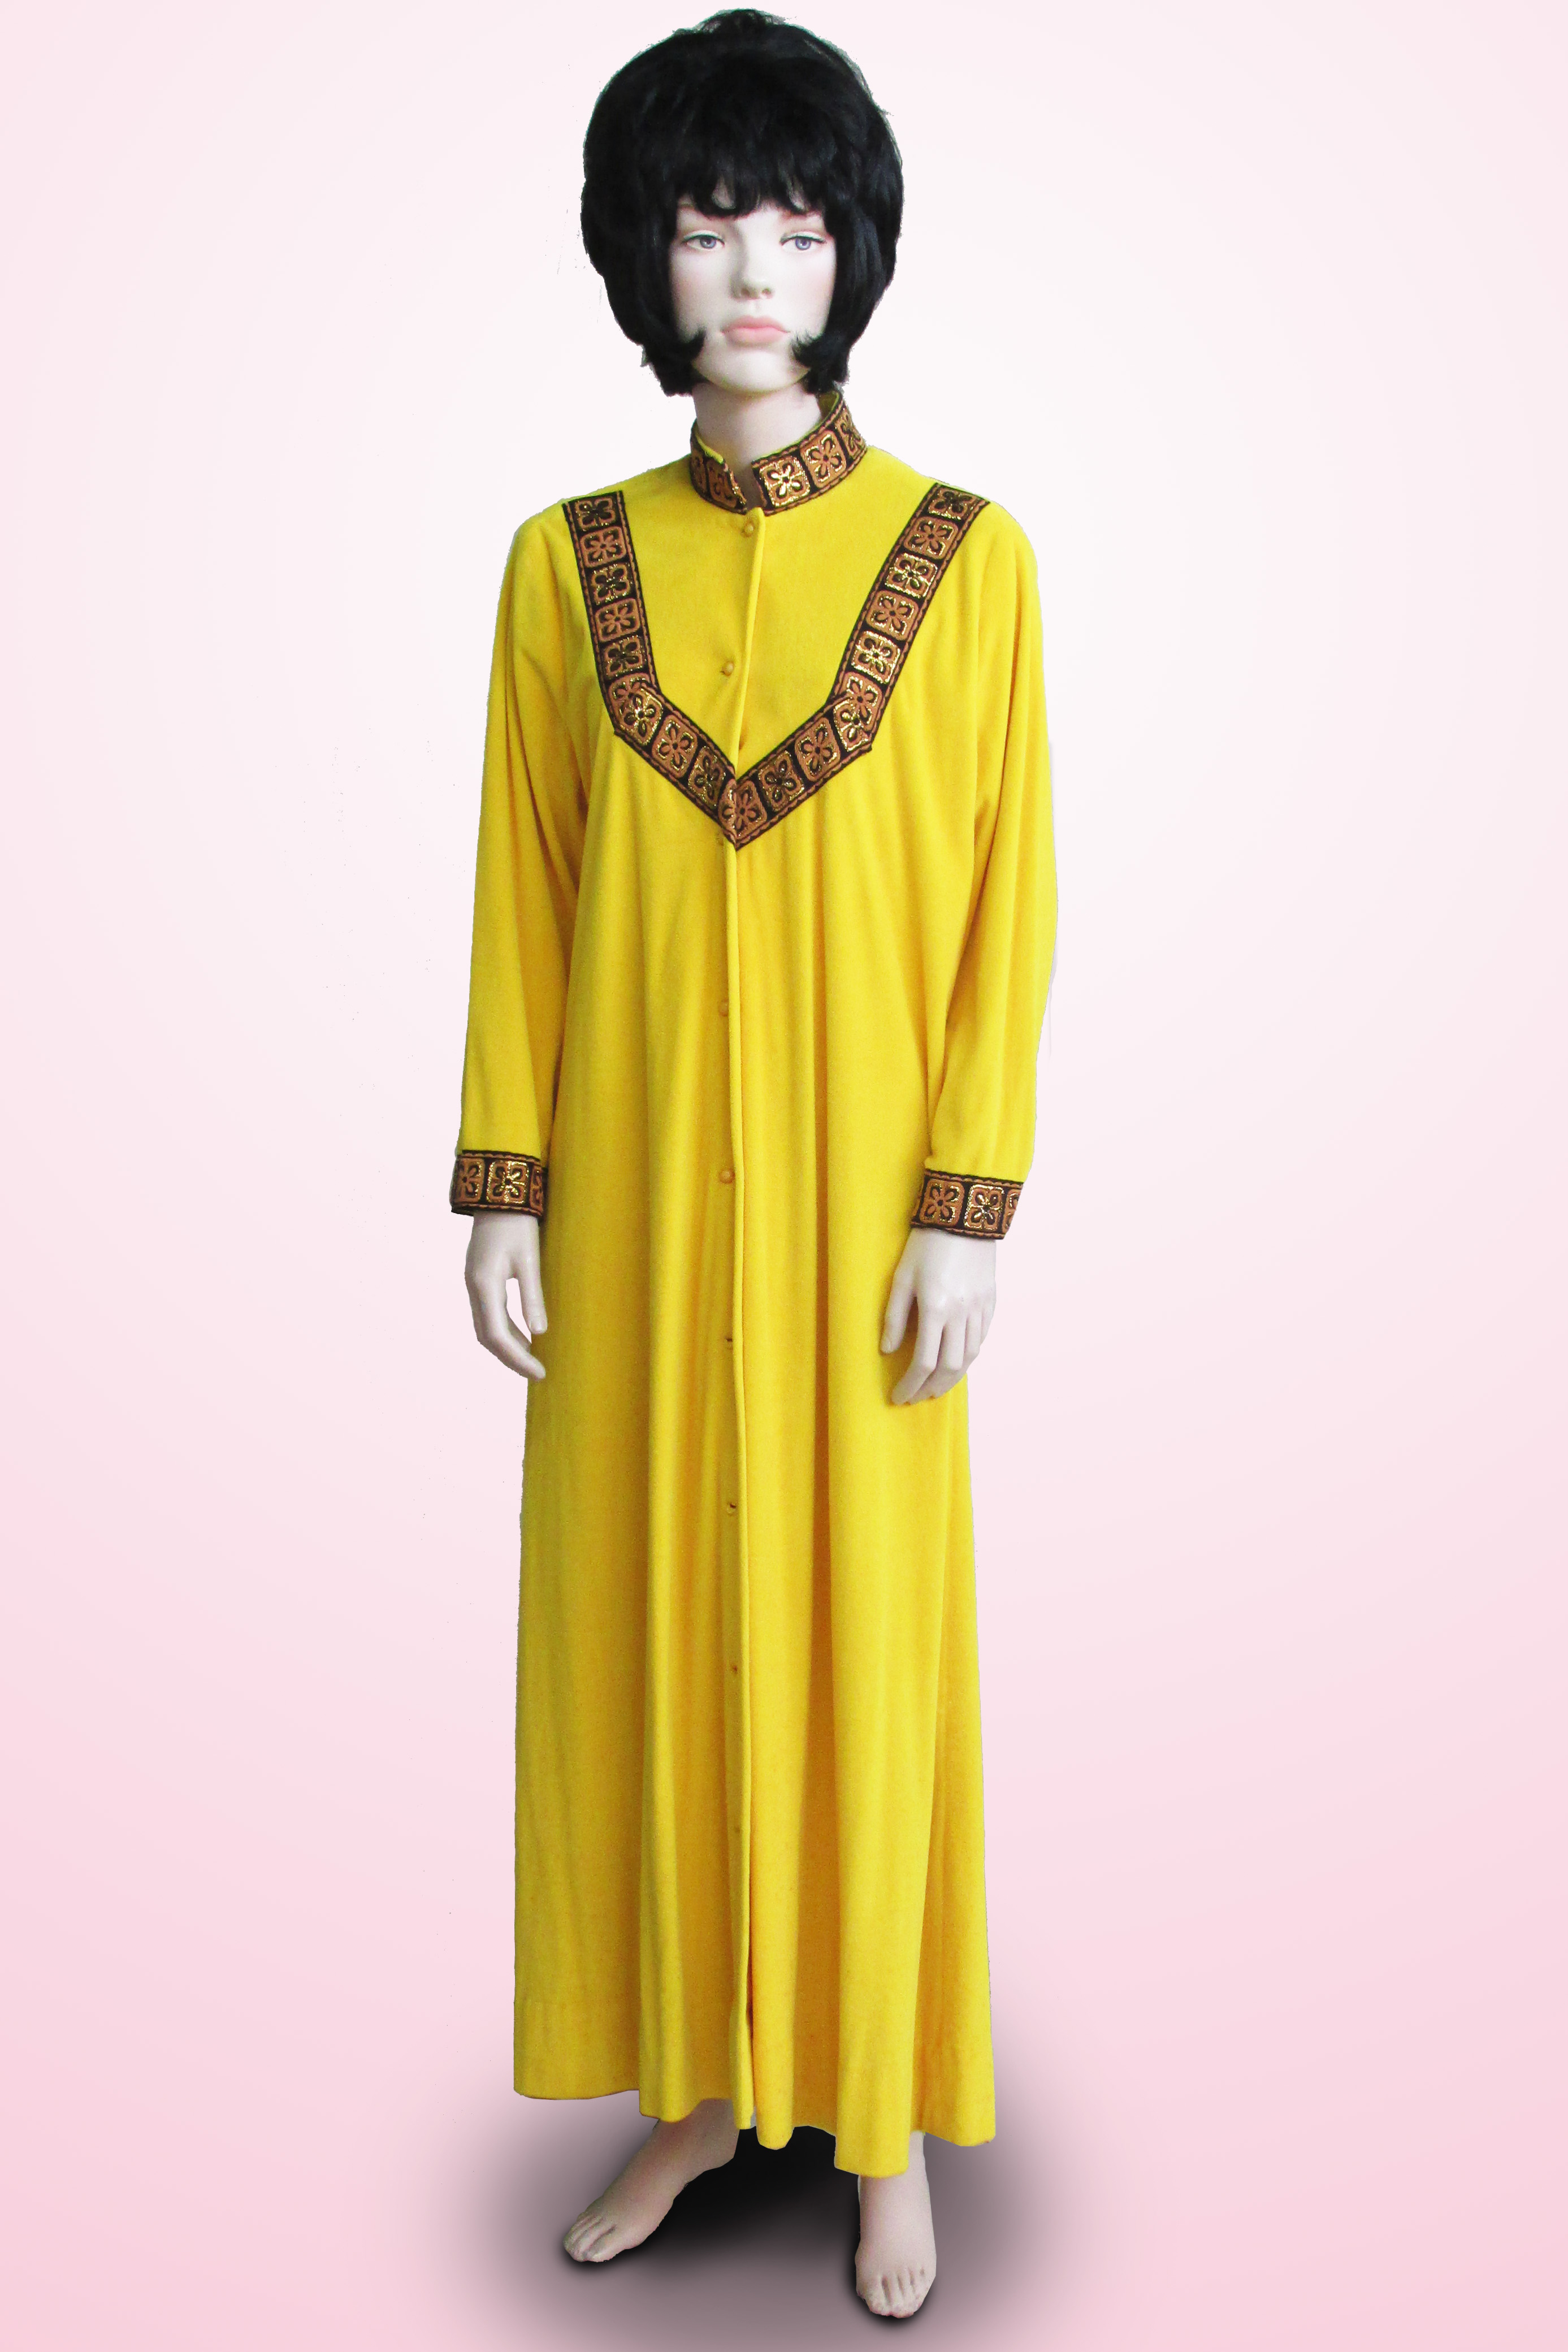 Dressing Gown Yellow with Gold Trim 1960s